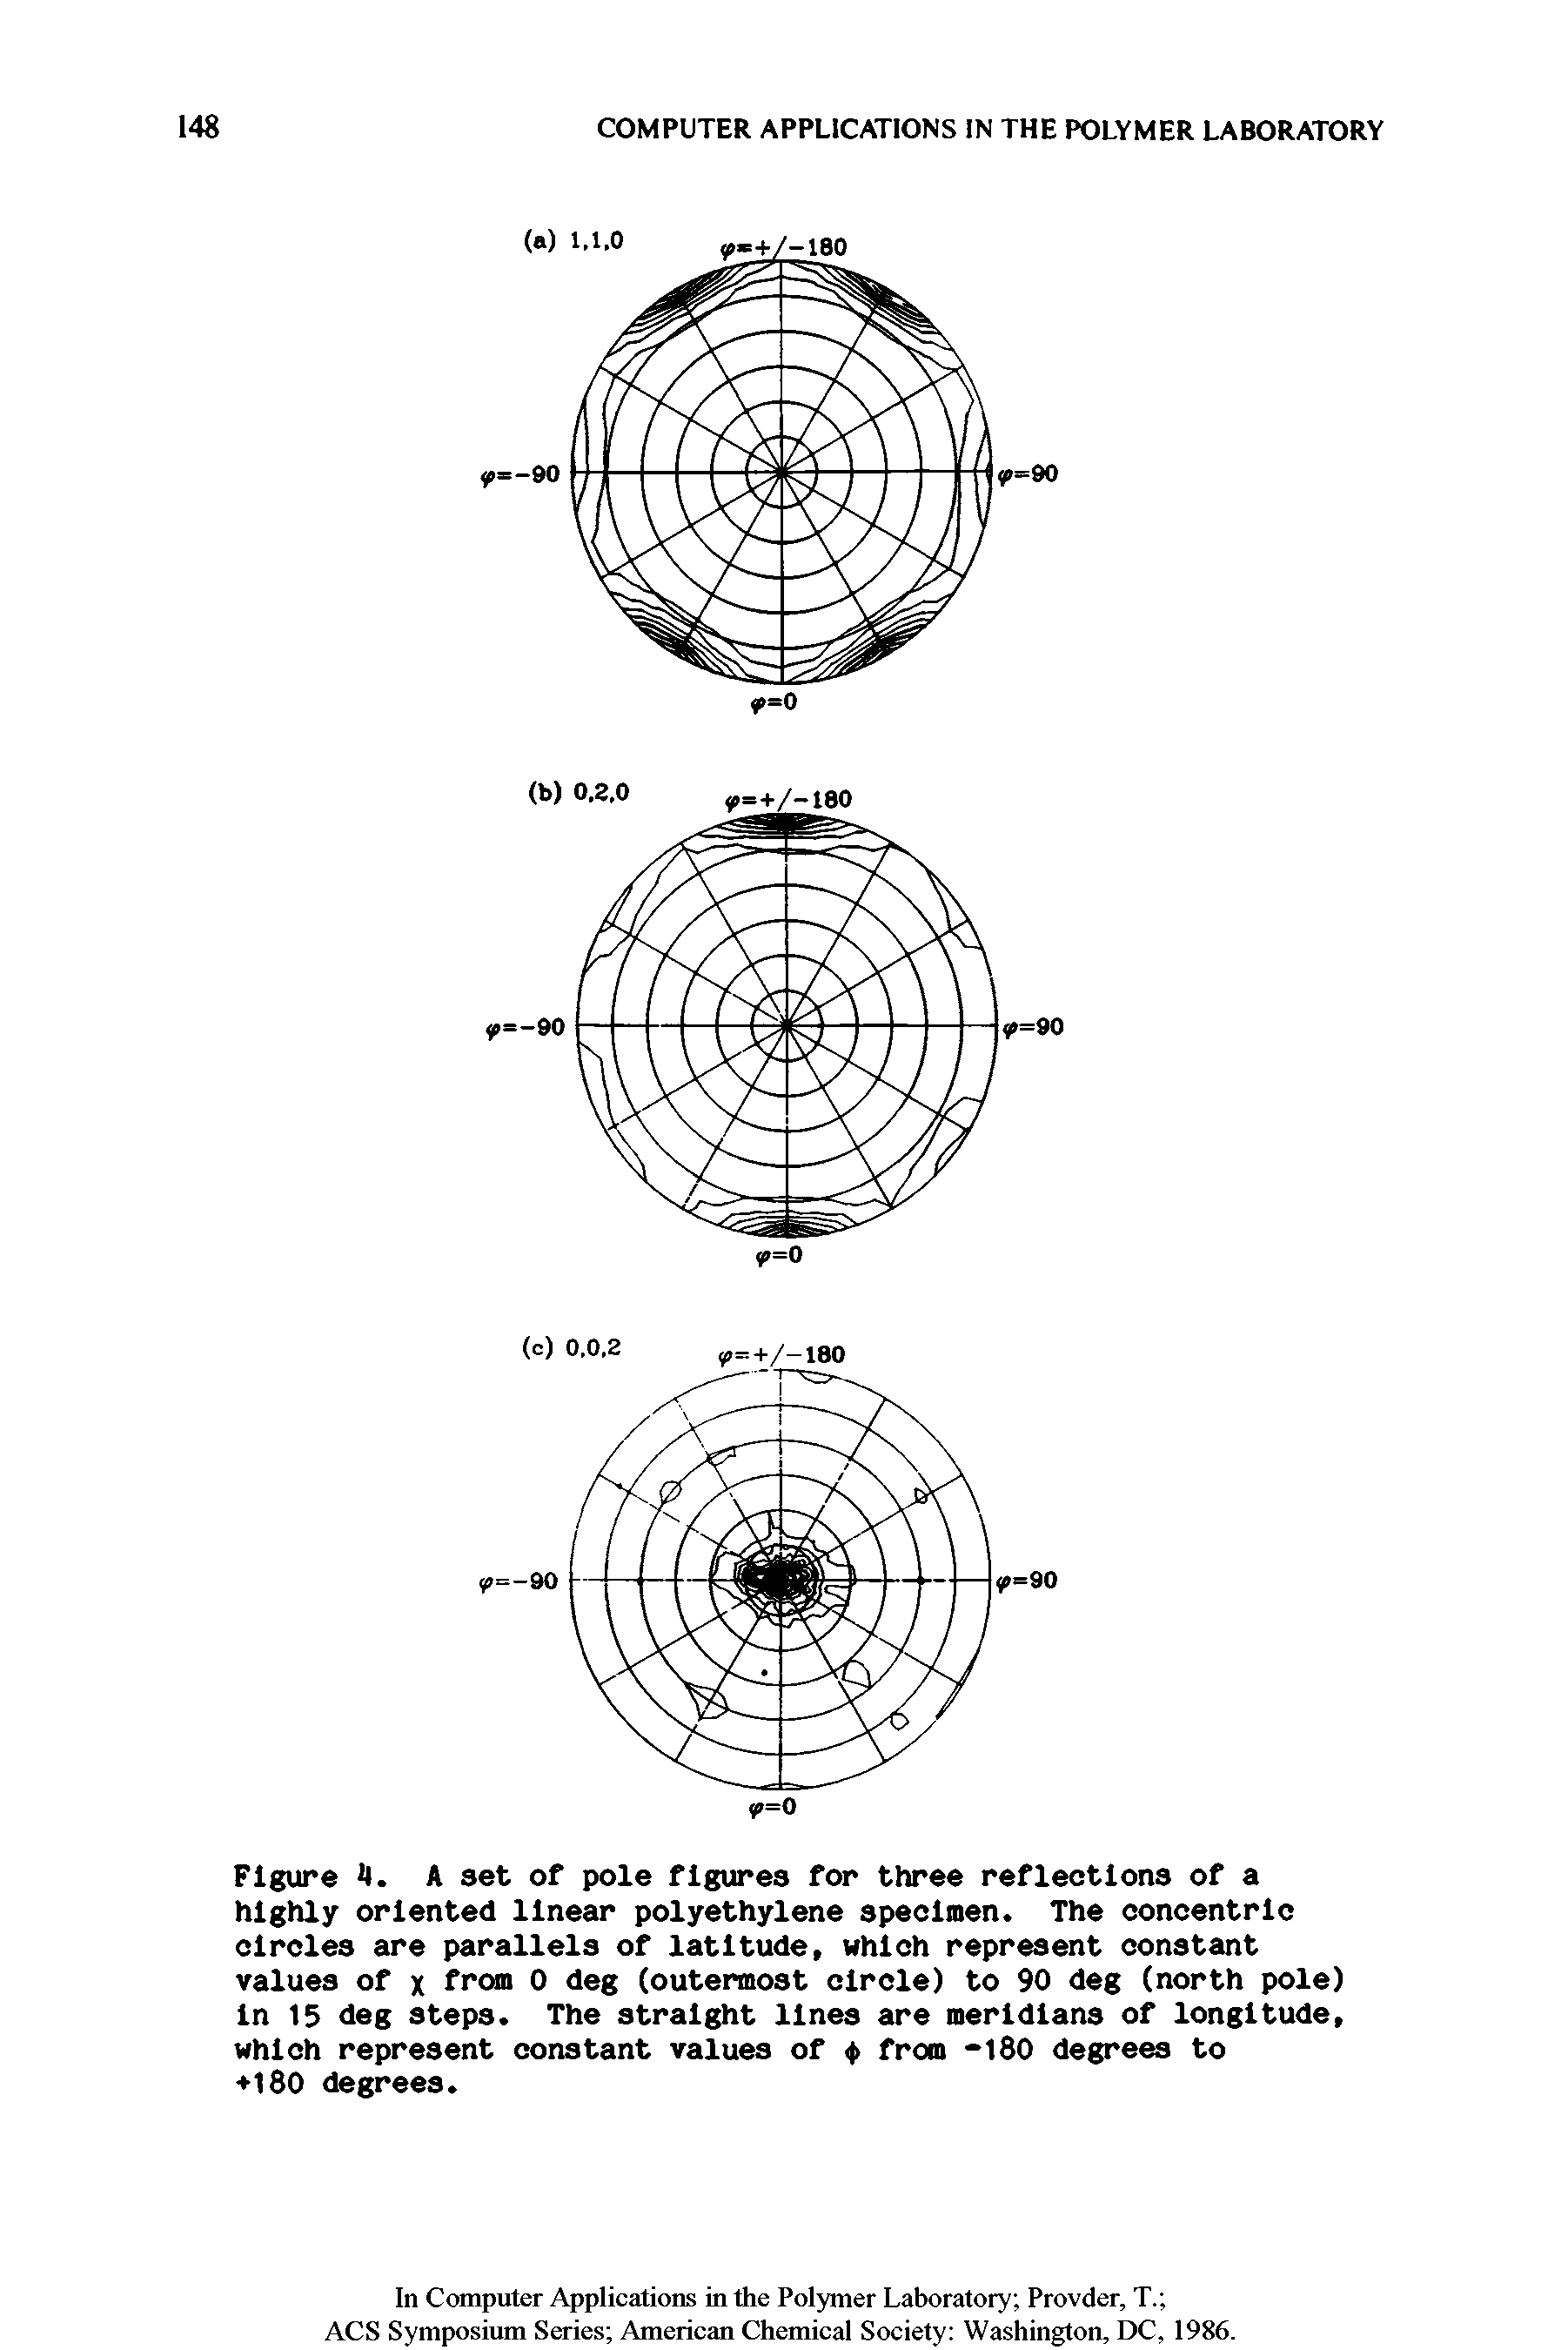 Figure 4. A set of pole figures for three reflections of a highly oriented linear polyethylene specimen. The concentric circles are parallels of latitude, which represent constant values of x from 0 deg (outermost circle) to 90 deg (north pole) in 15 deg steps. The straight lines are meridians of longitude, which represent constant values of < > from 180 degrees to +180 degrees.